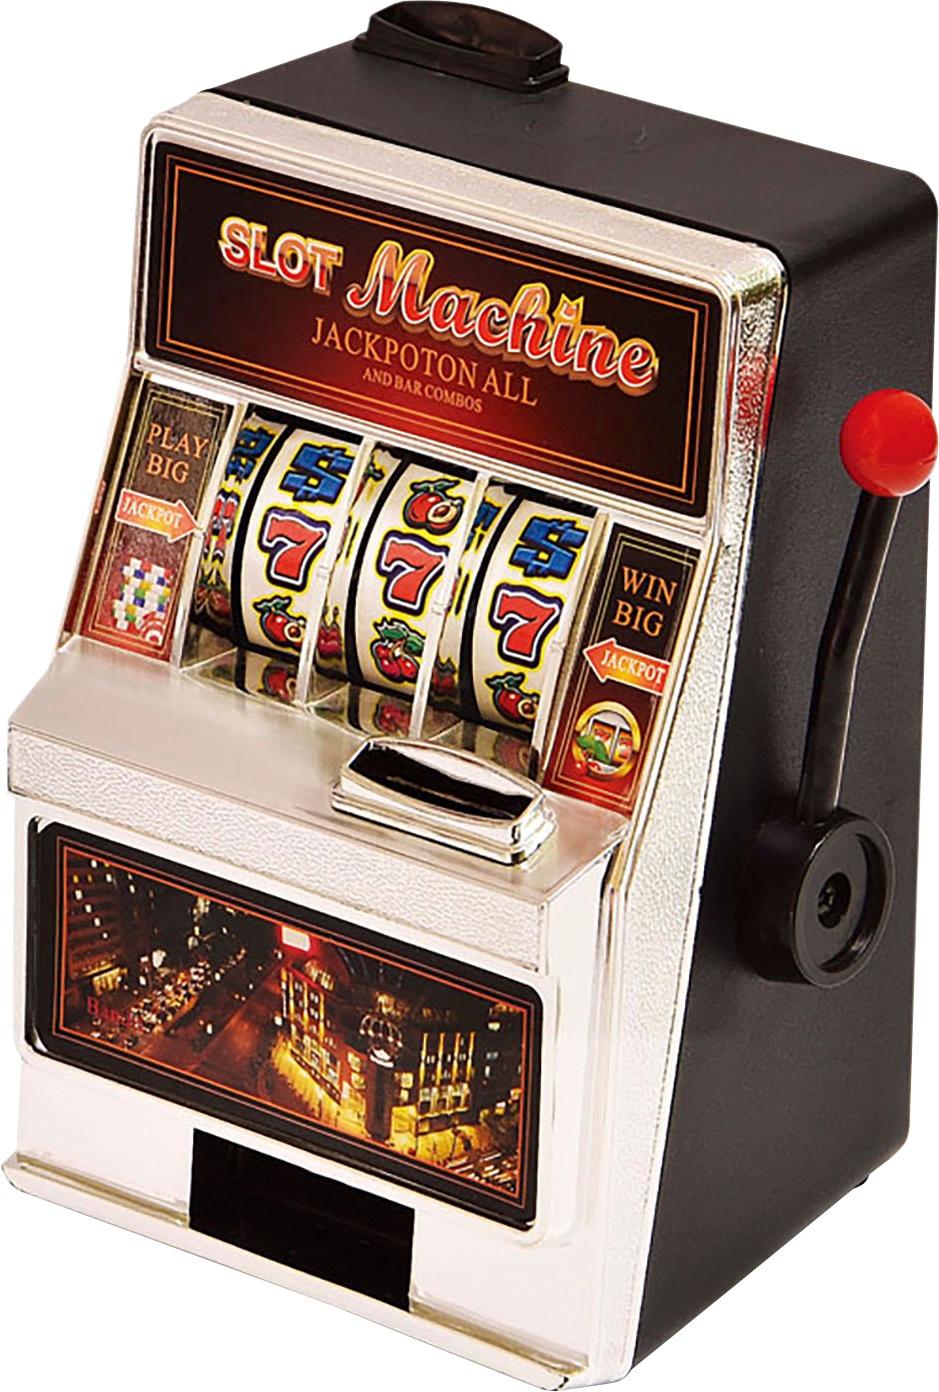 I want to buy a slot machine